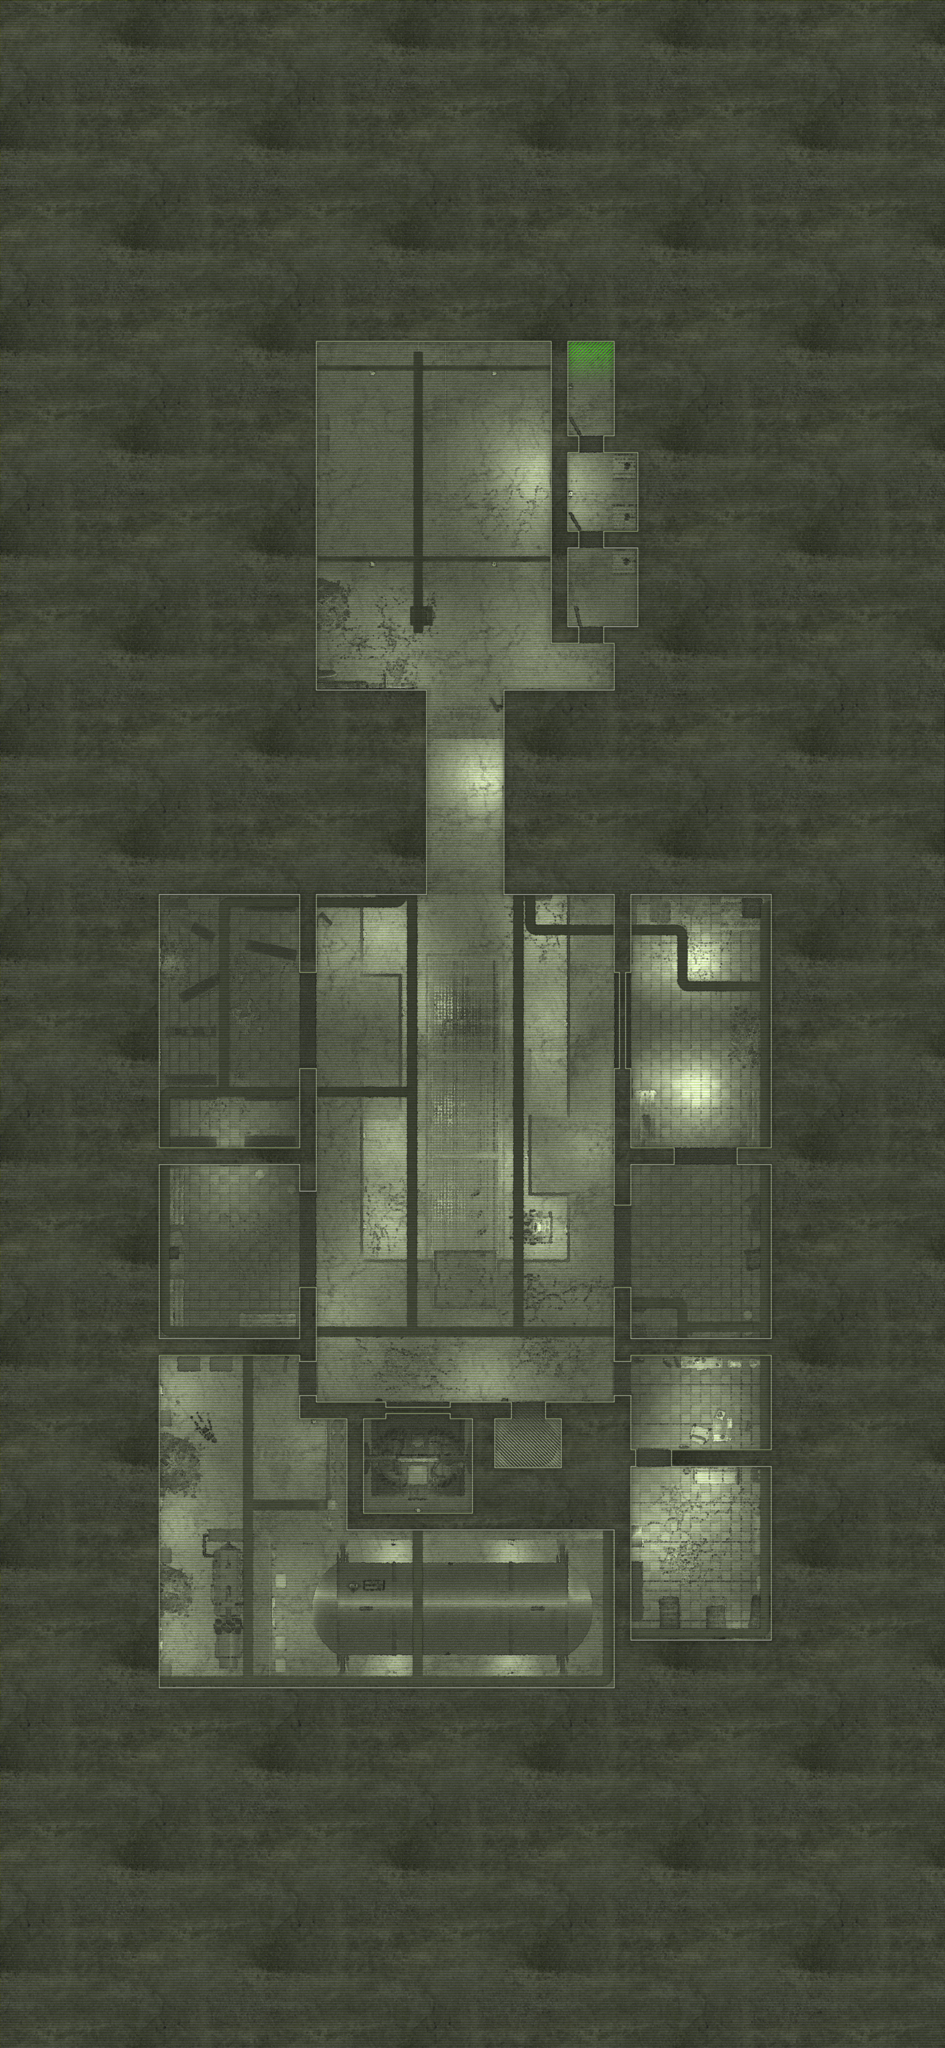 ATOM RPG: Post-apocalyptic indie game - Bunker 317 - Level 1